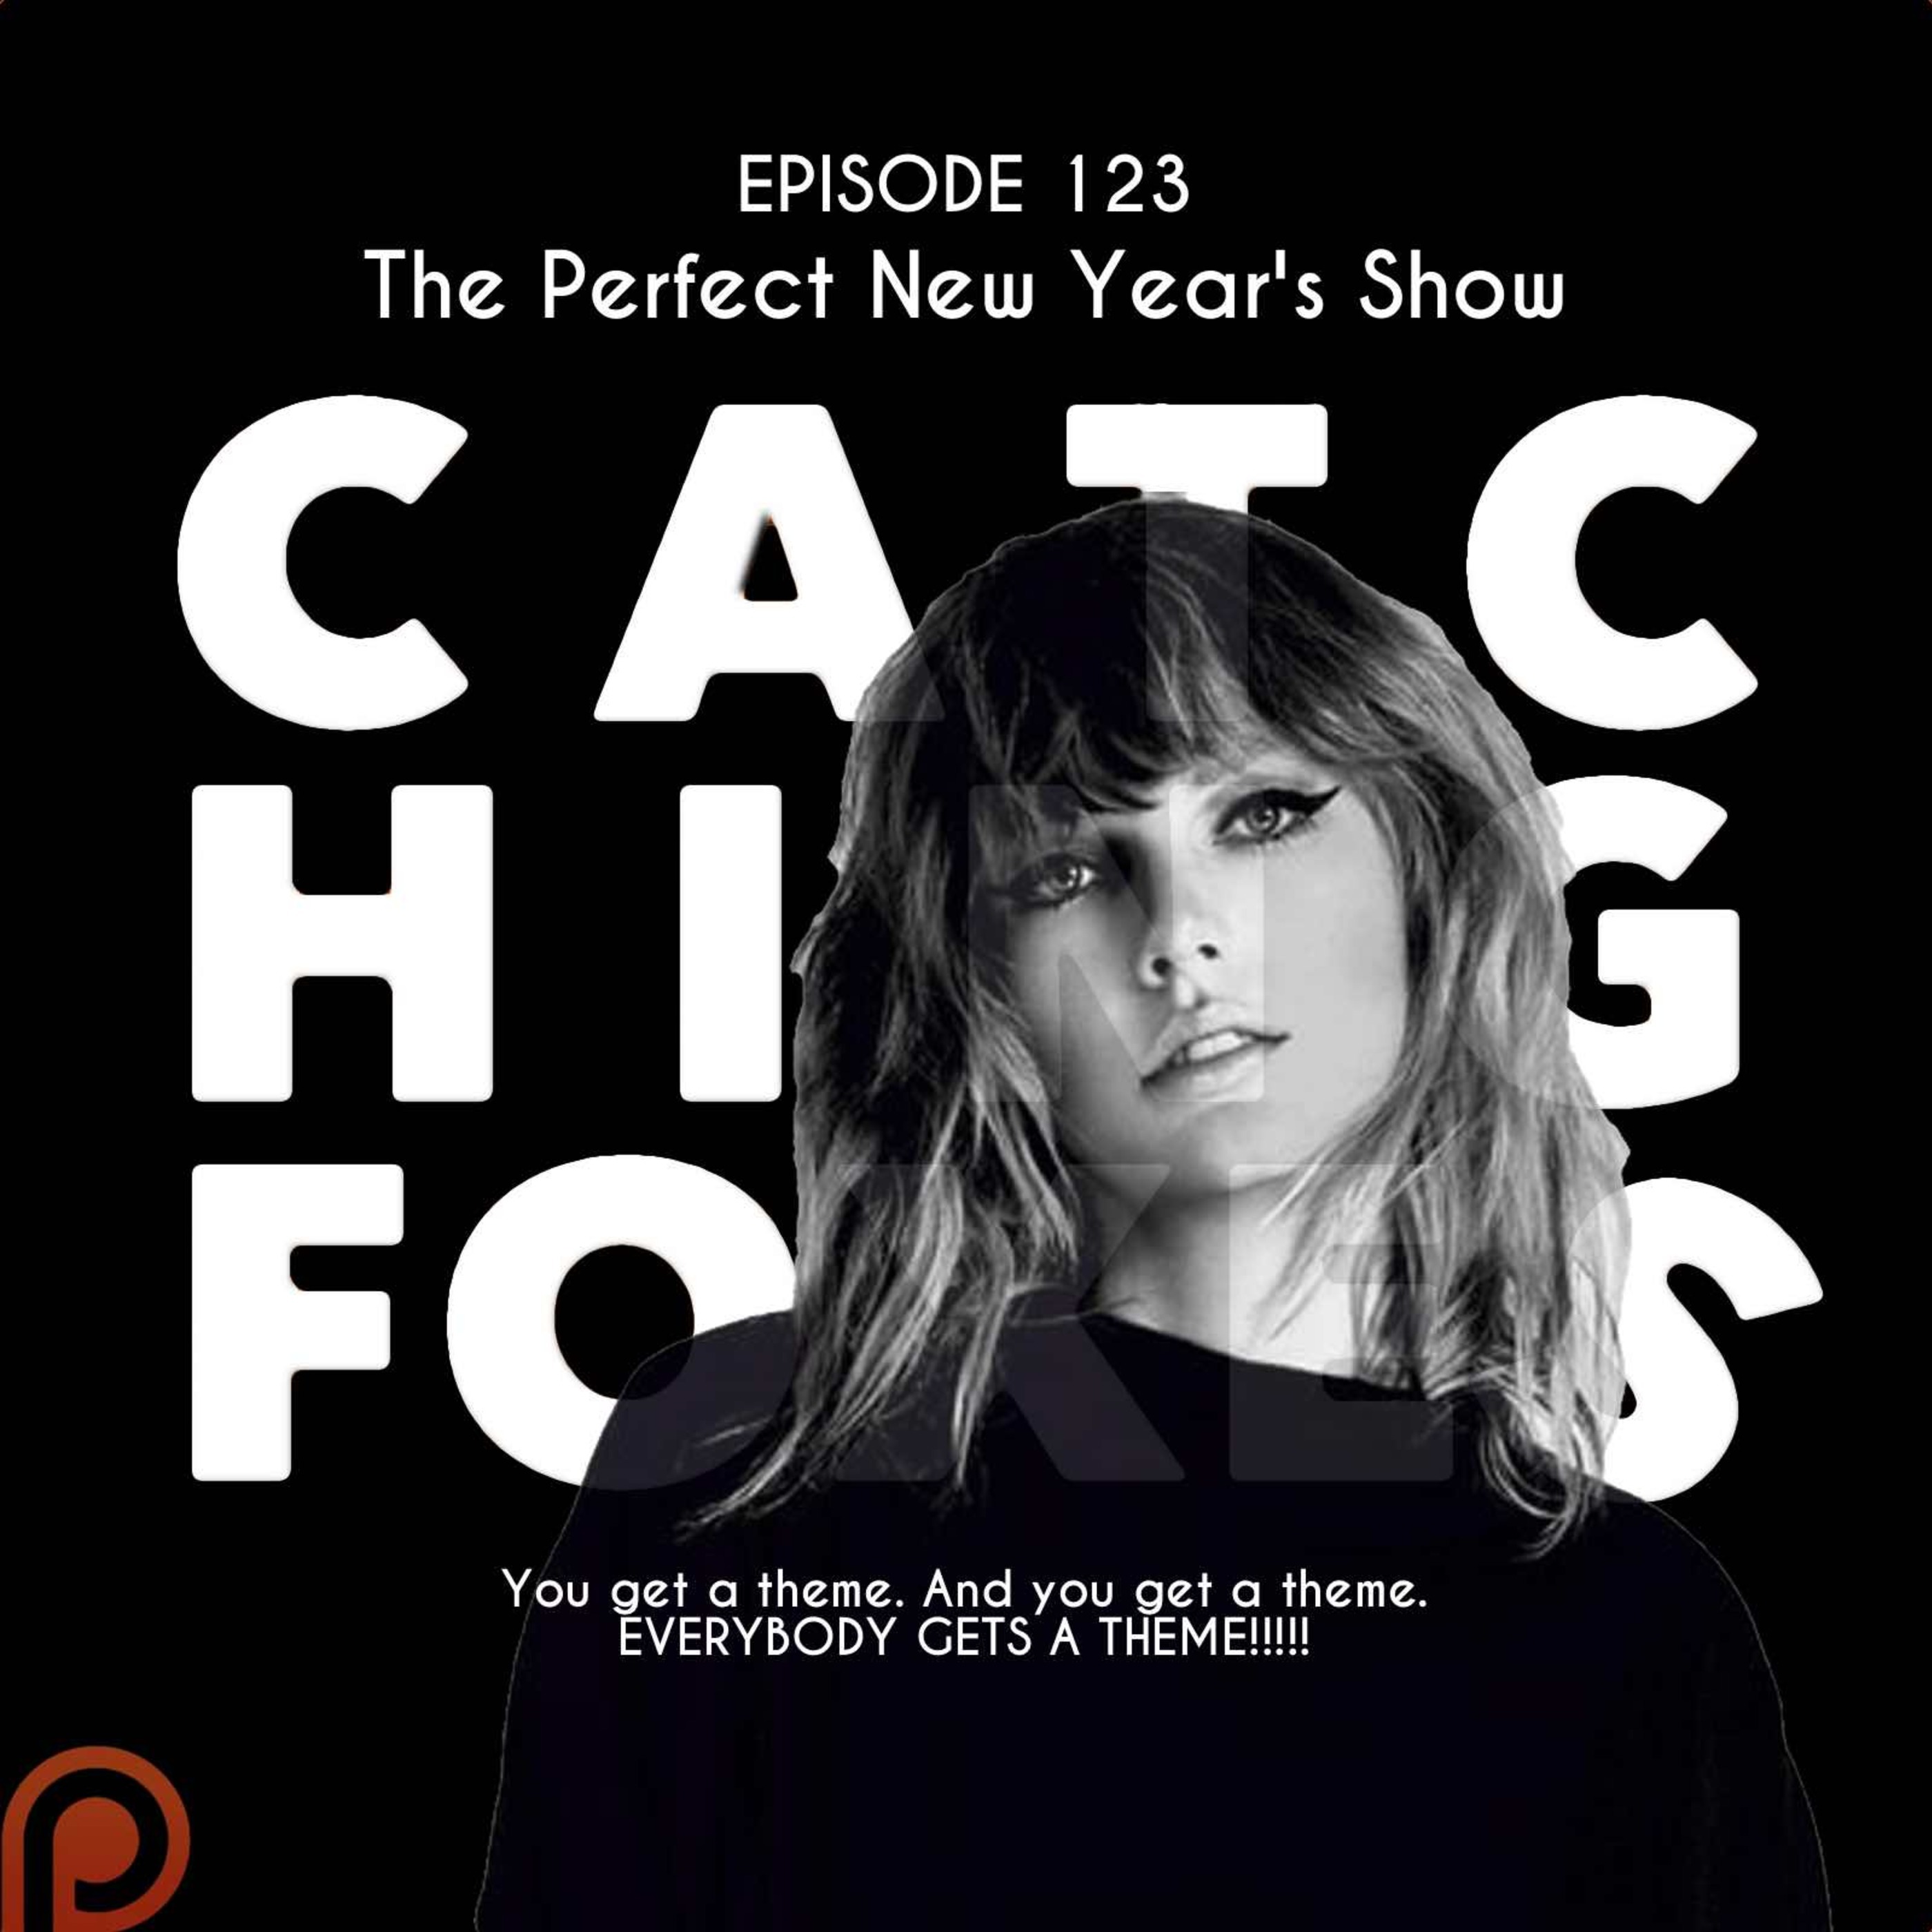 The Perfect New Year’s Show